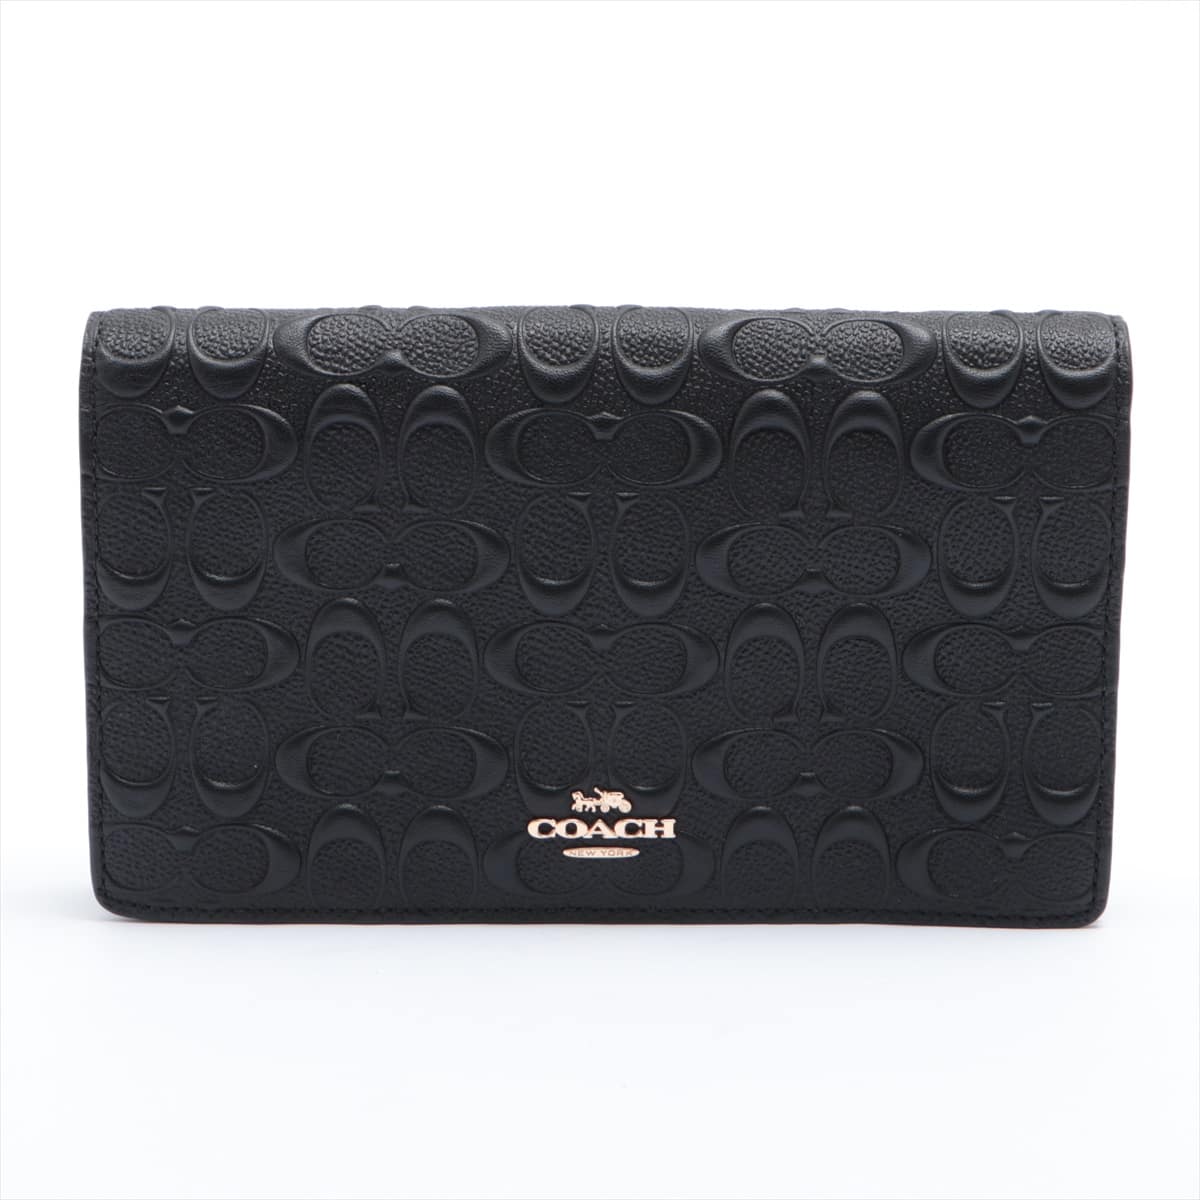 COACH Anna Ford Signature Leather Shoulder wallets Black